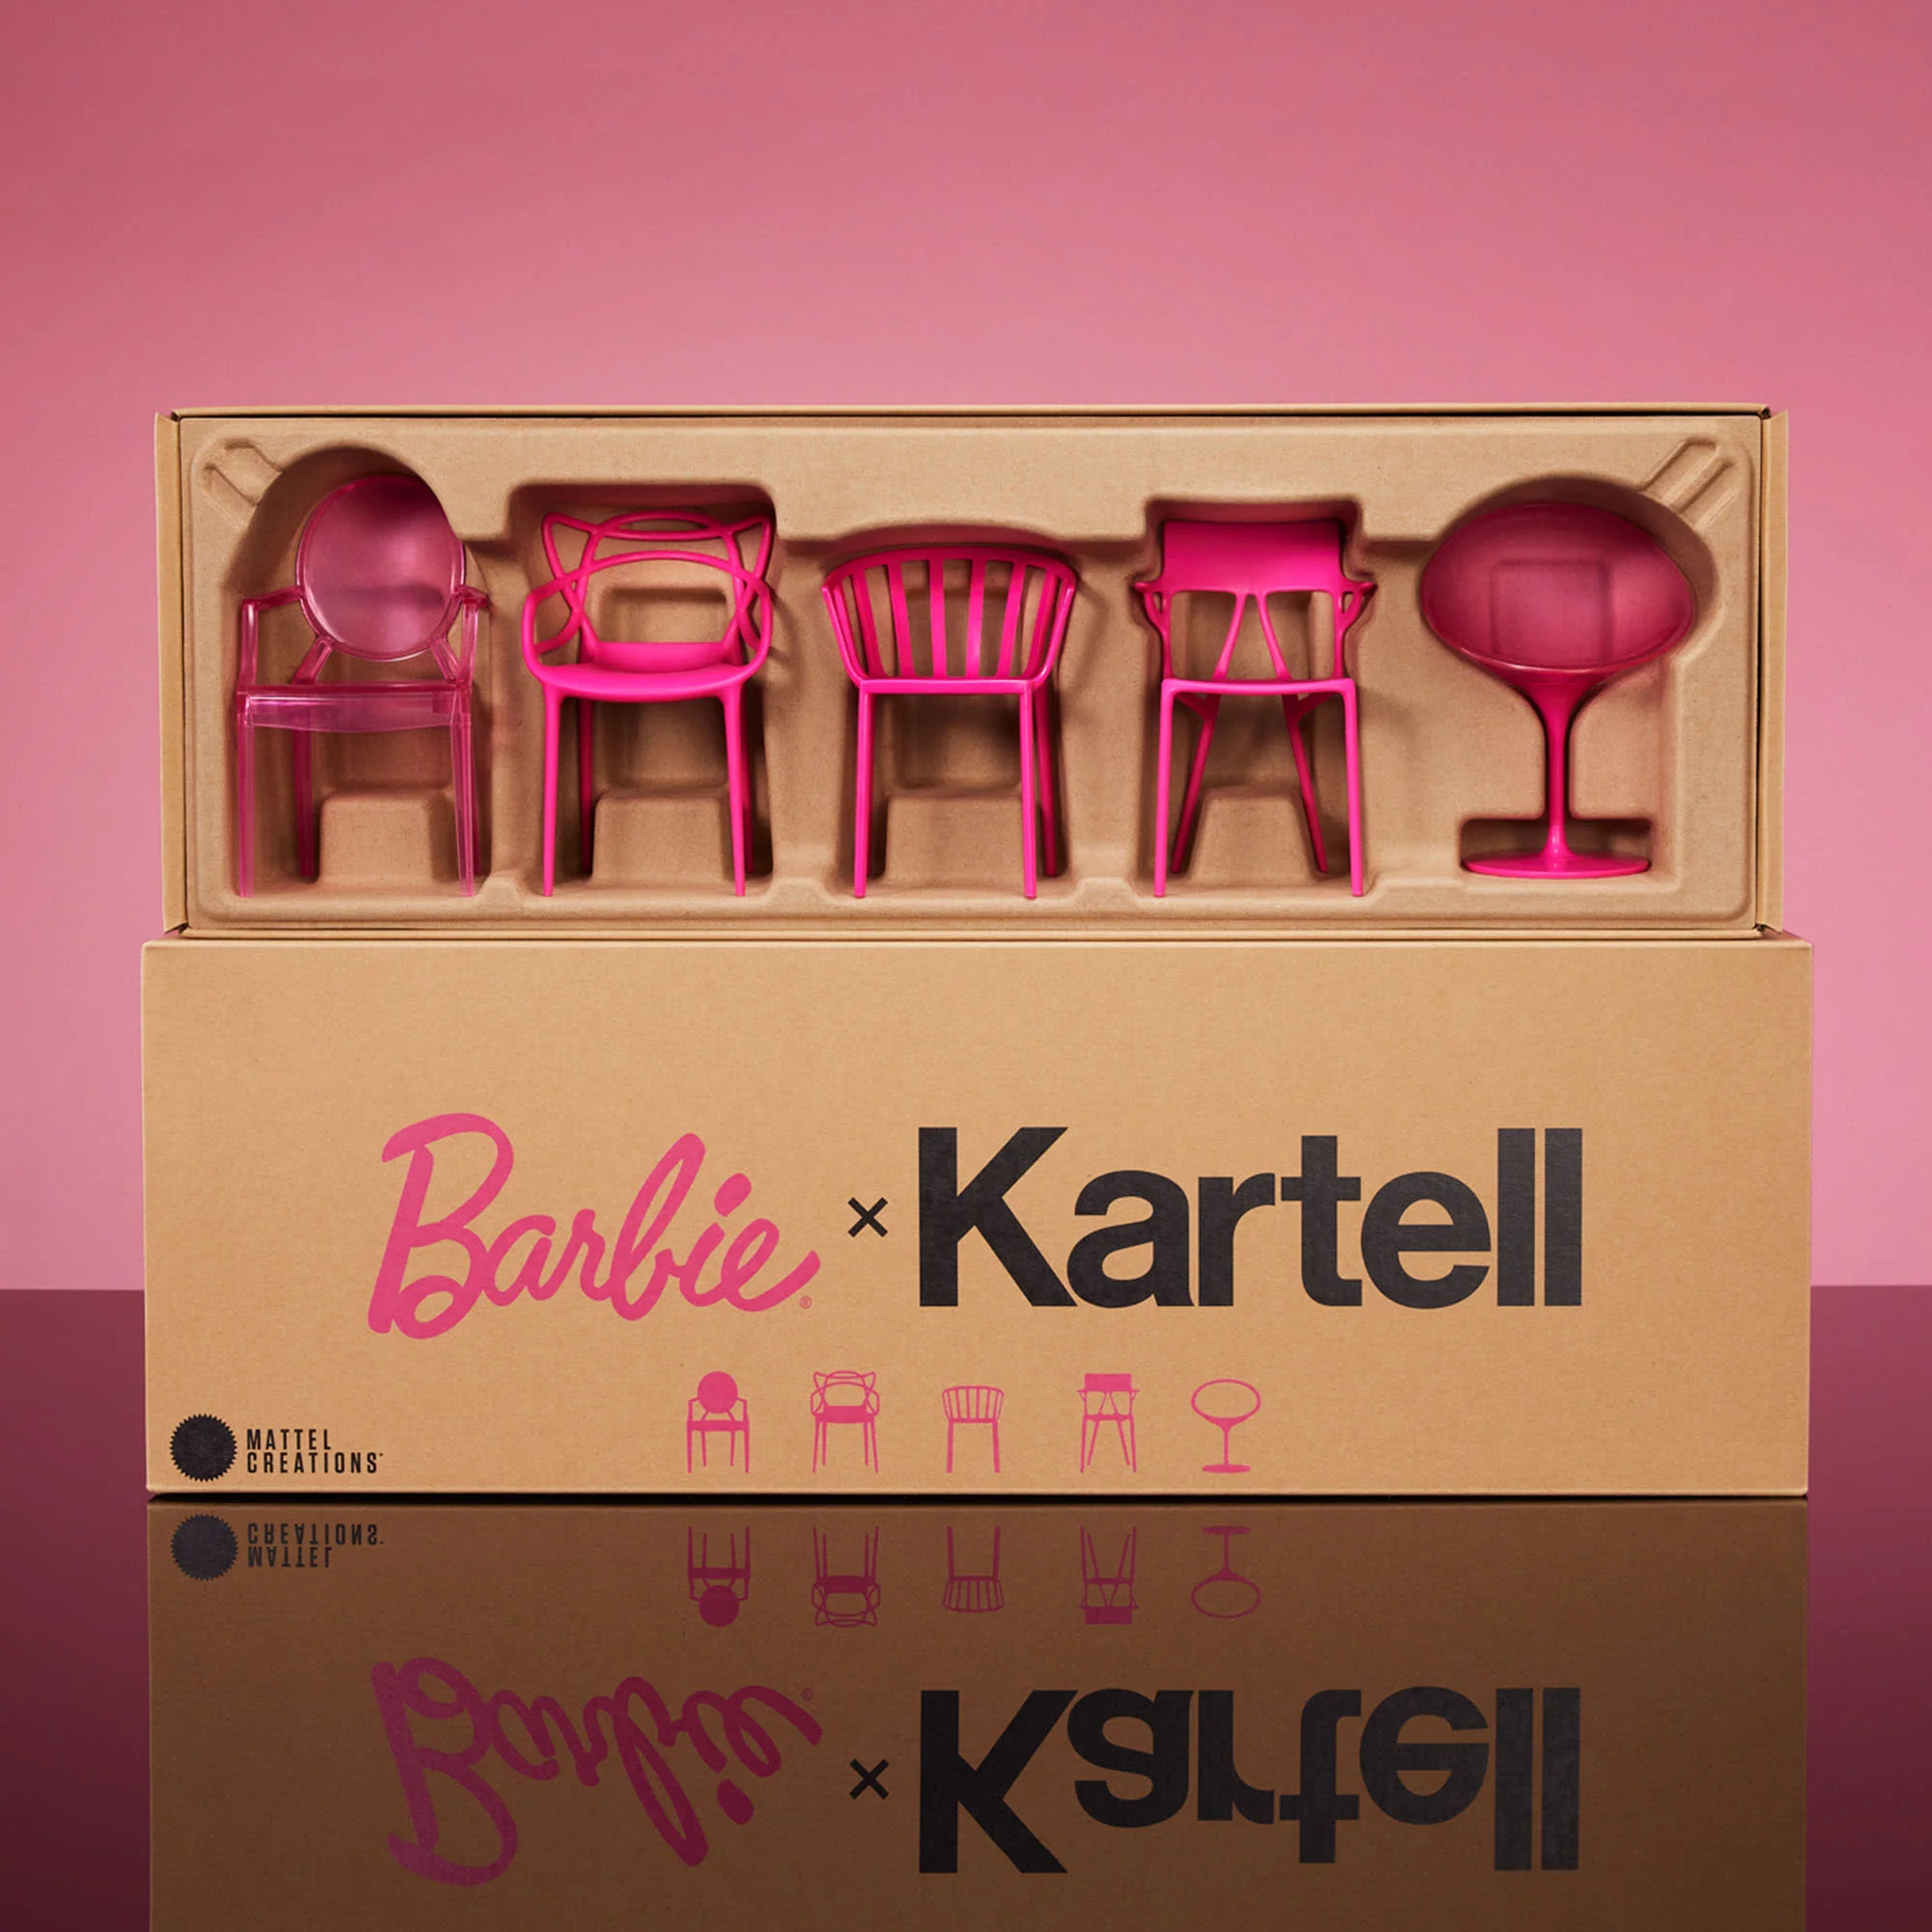 Kartell Gives the Barbie Dreamhouse a Massive Upgrade with Limited Edition Toy Chairs